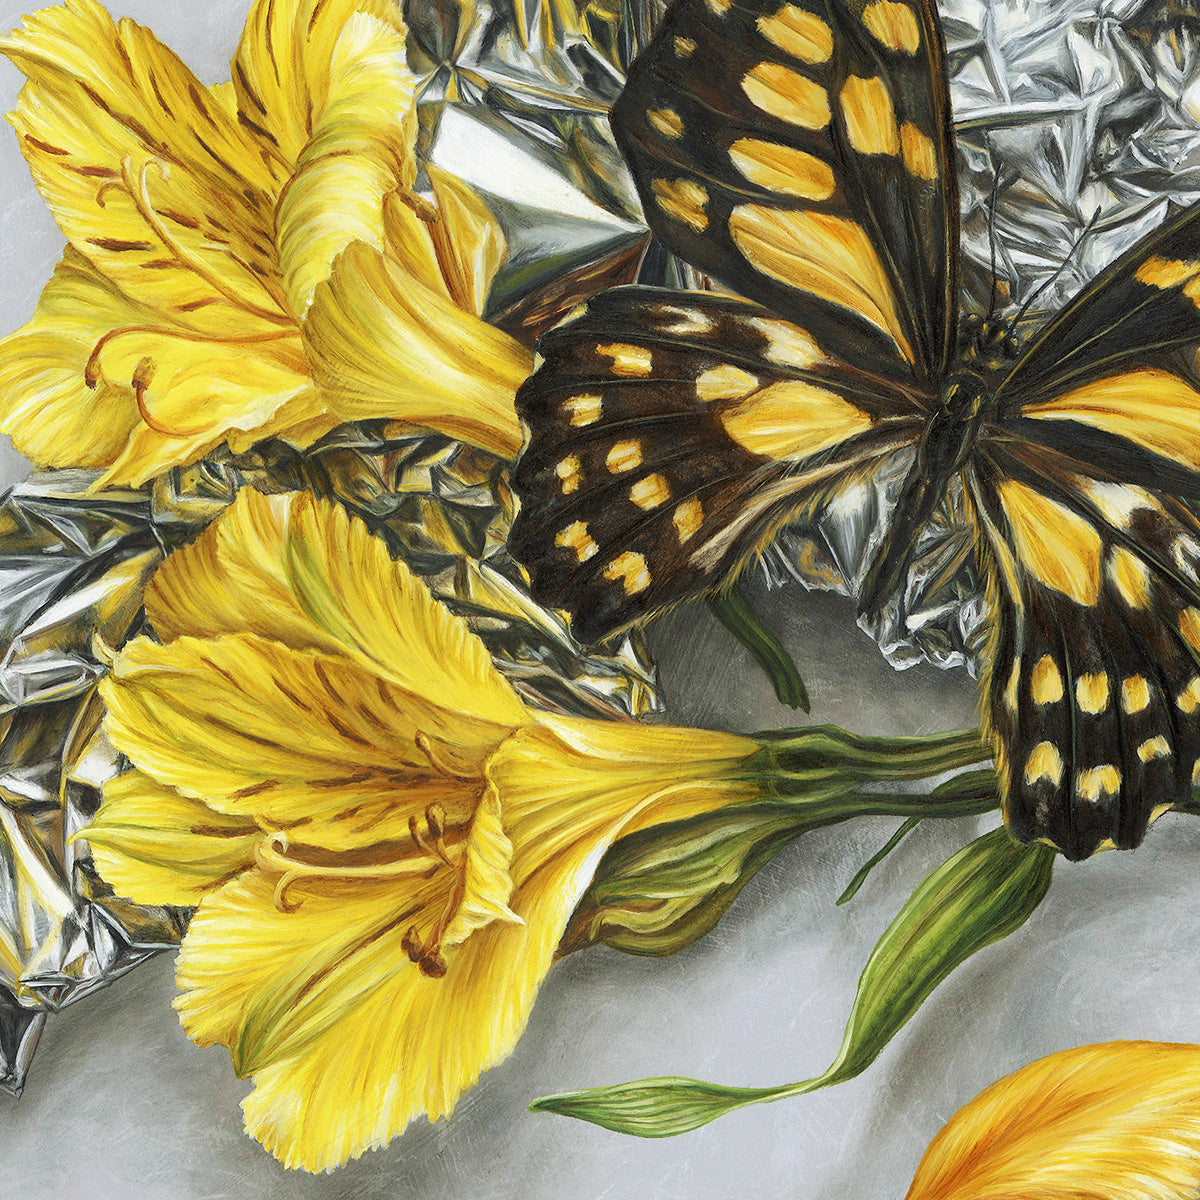 "Butterfly Mirrored with Alstroemeria"